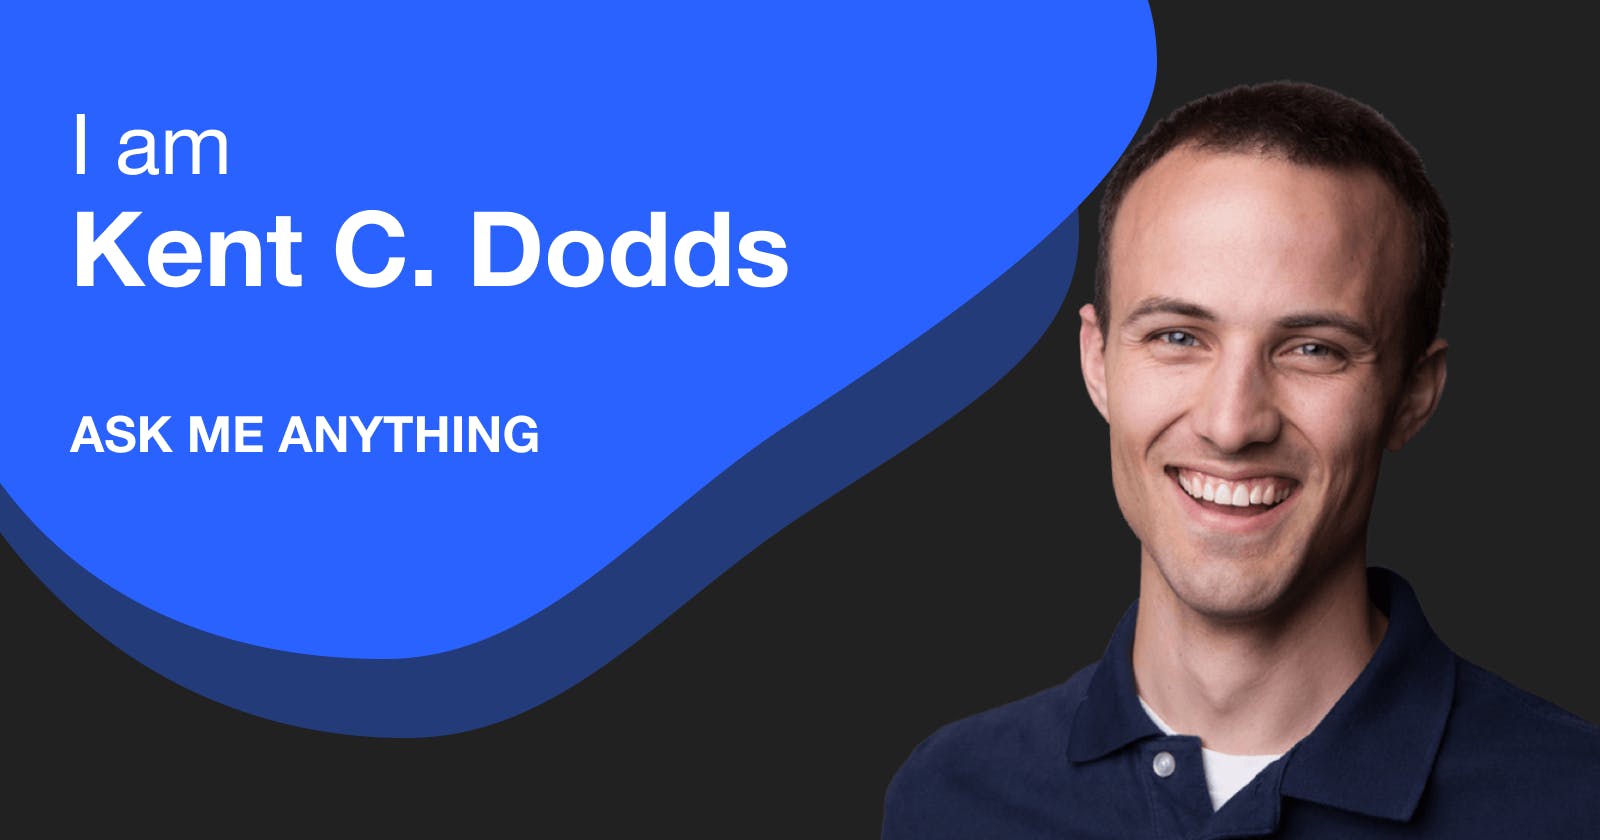 I'm Kent C. Dodds. I help people make the world better through quality software. Ask me anything!